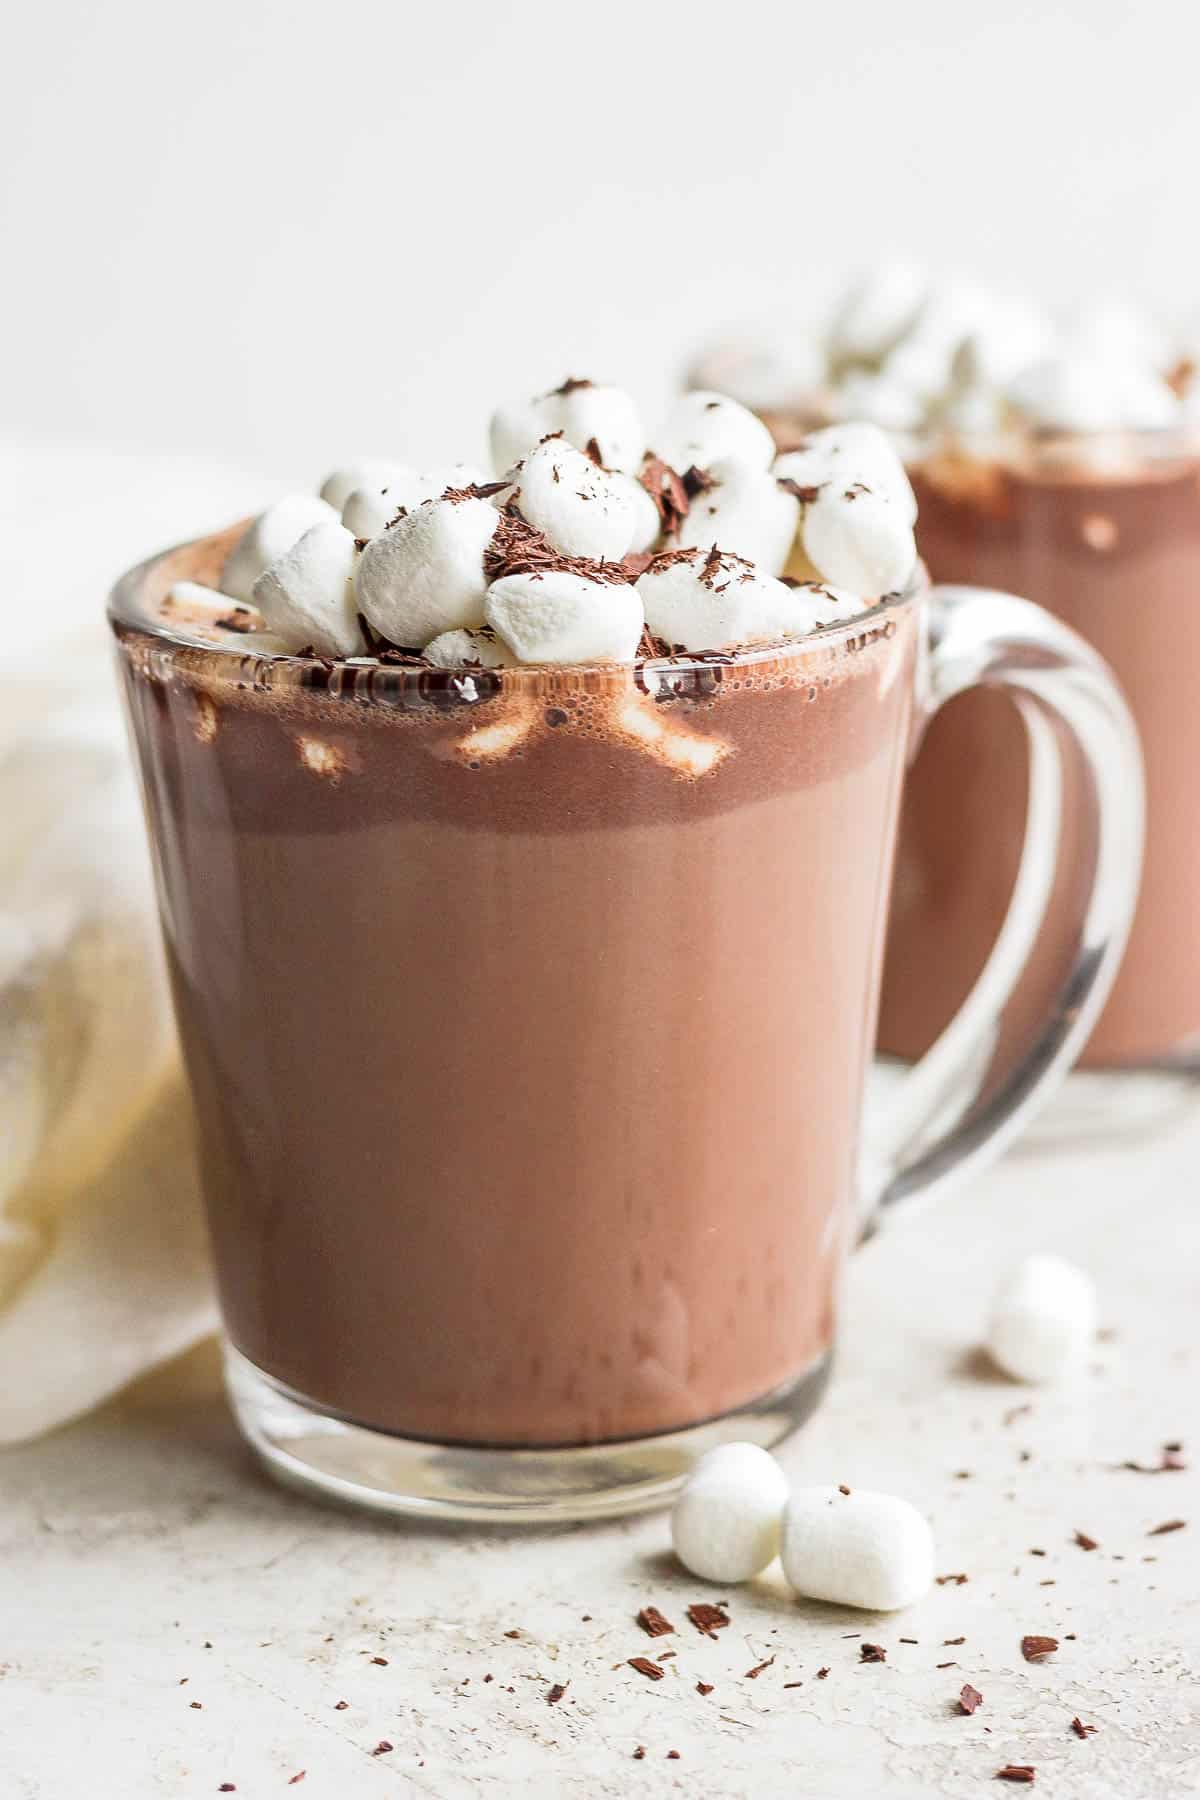 How to Make Hot Chocolate {Step-by-Step Tutorial} - FeelGoodFoodie